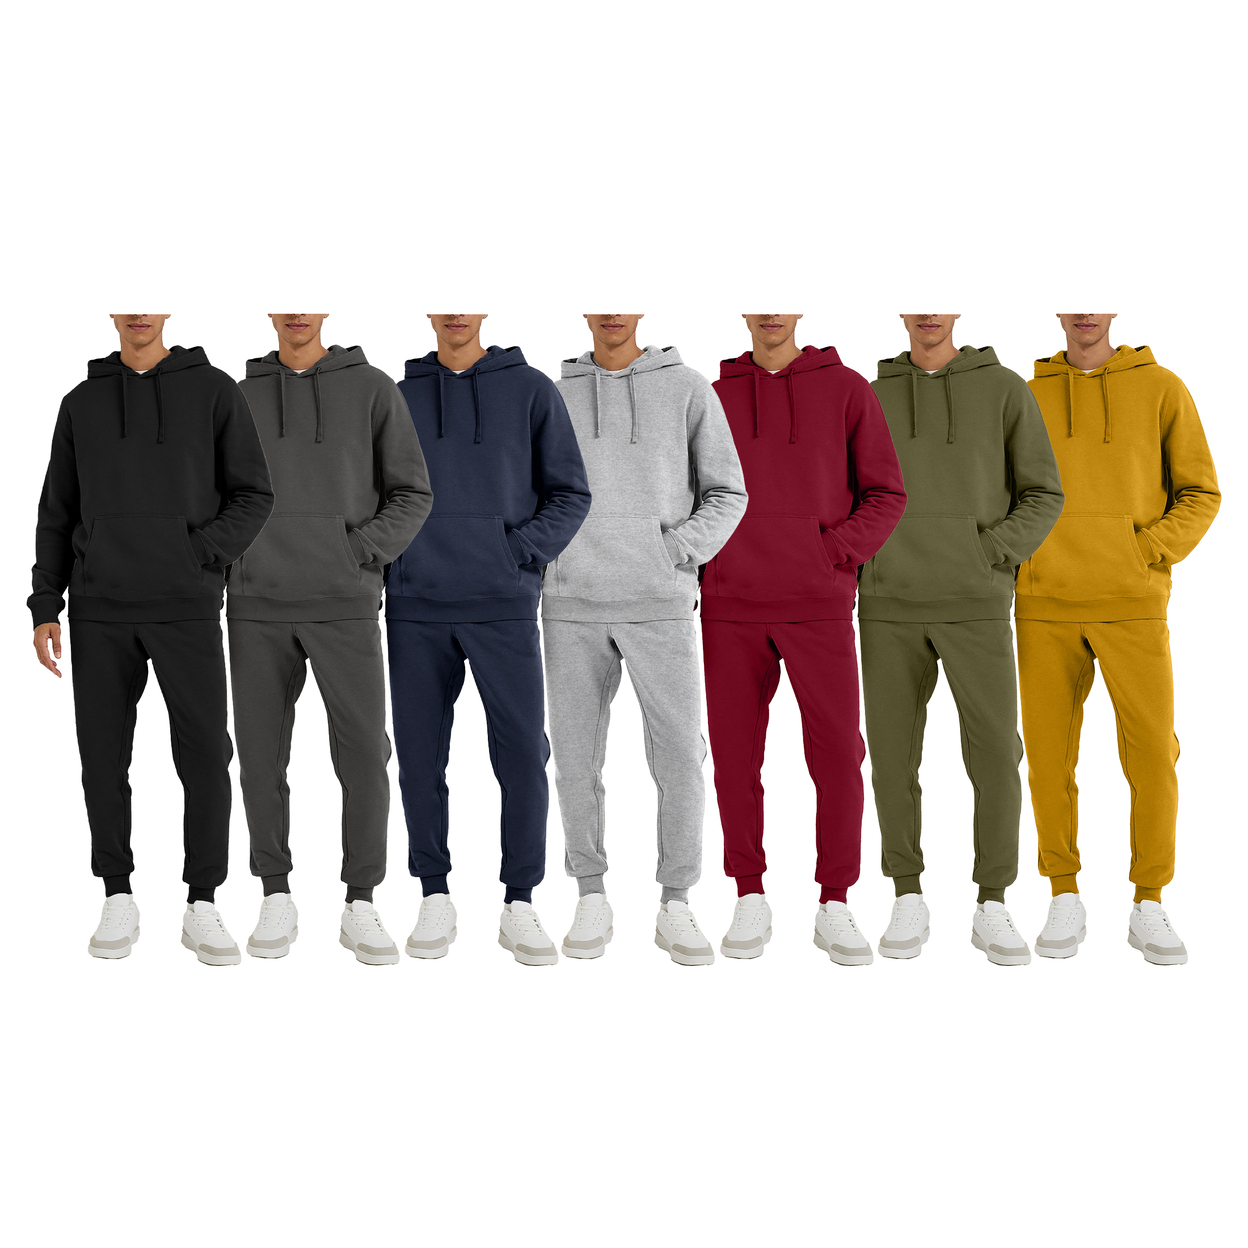 Multi-Pack: Men's Big & Tall Athletic Active Jogging Winter Warm Fleece Lined Pullover Tracksuit Set - Charcoal, 1-pack, Large